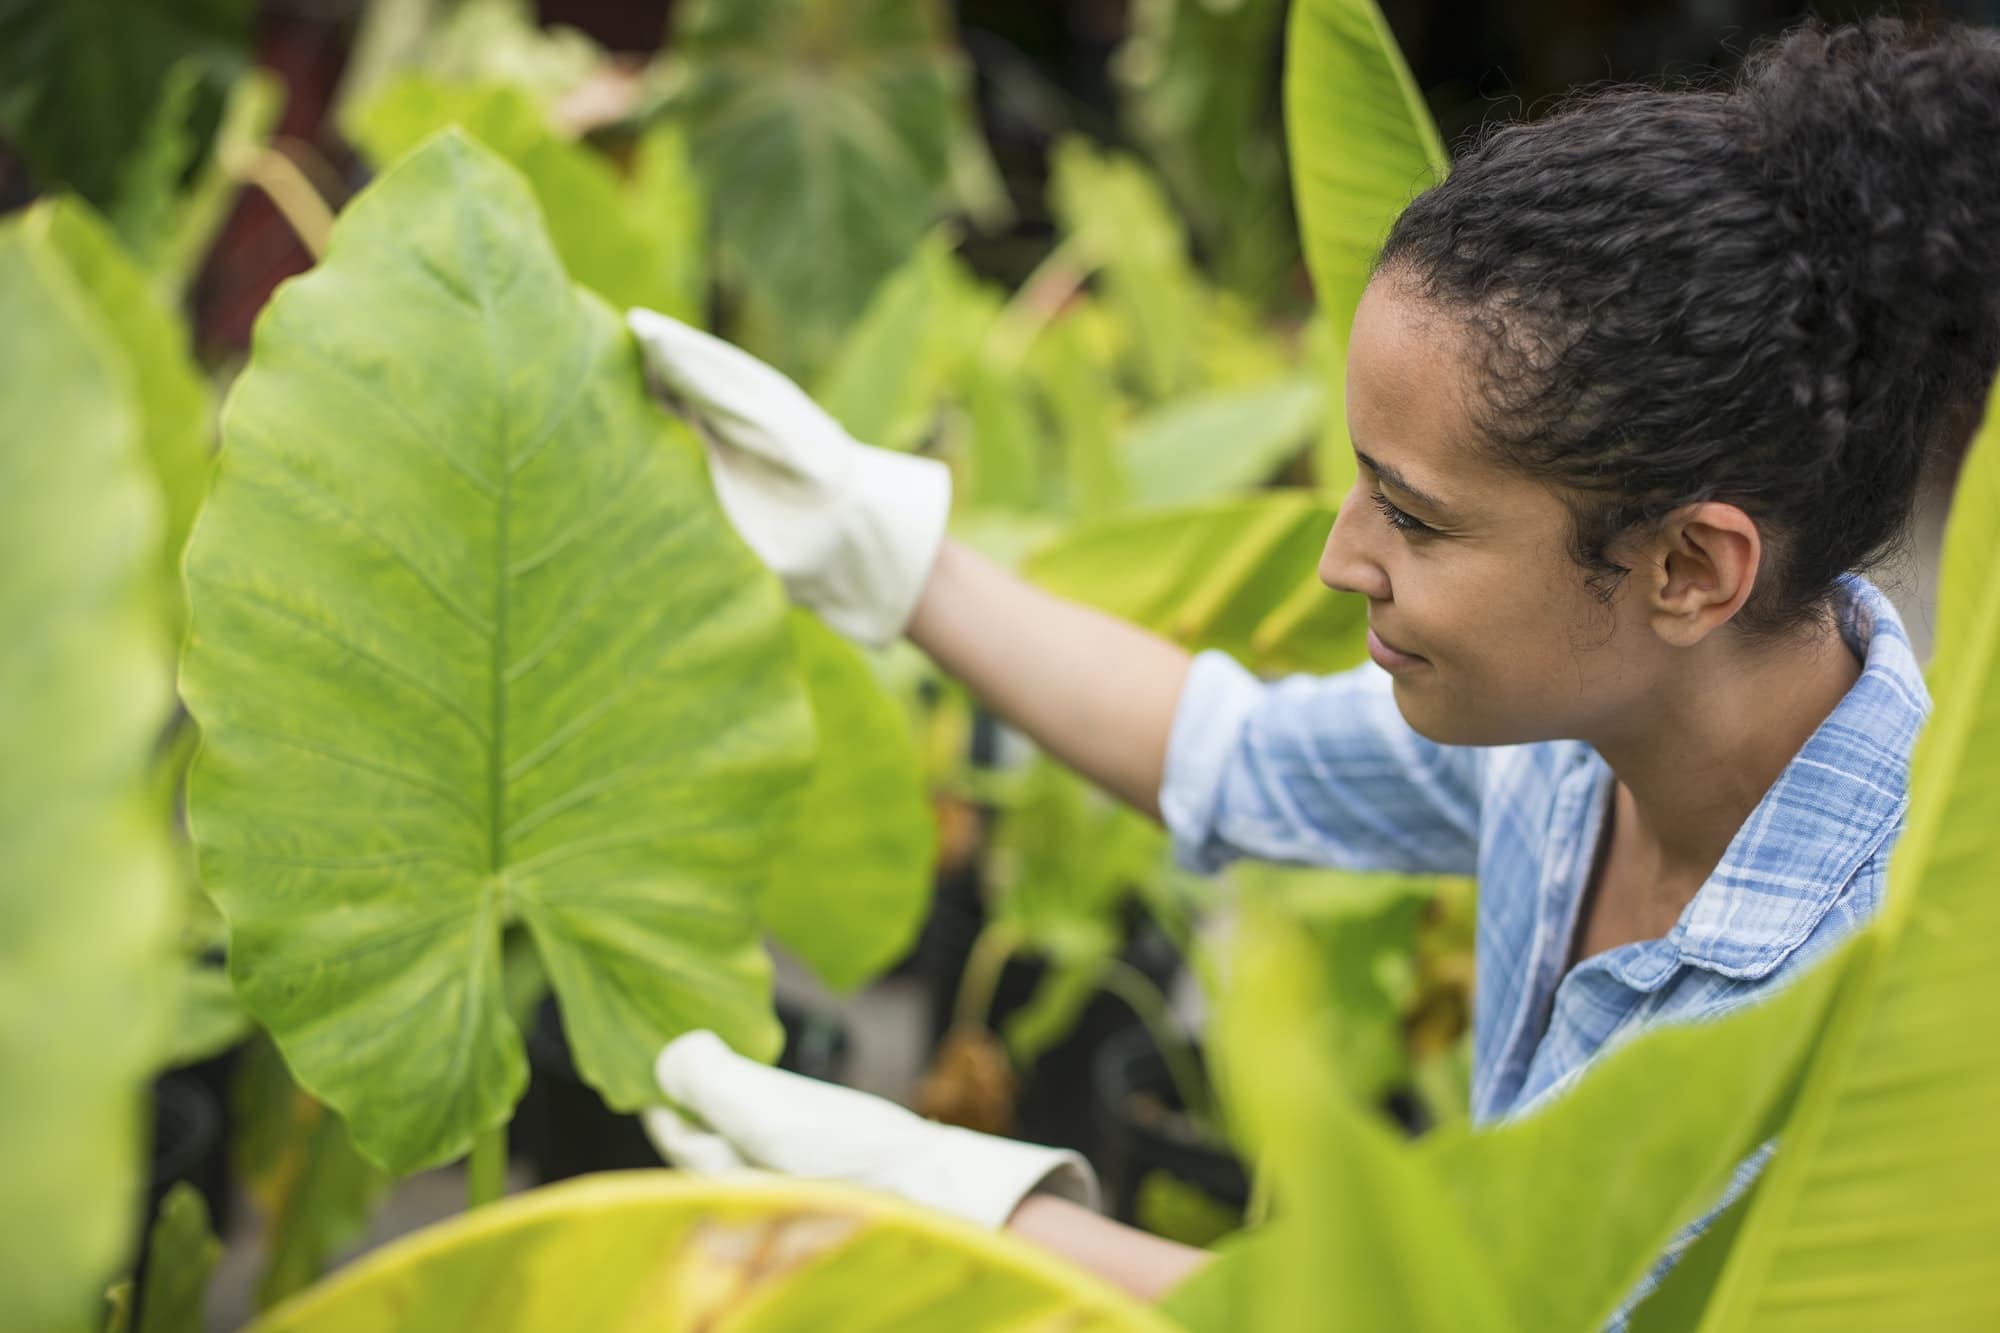 Working on an organic farm. A woman wearing gloves examining the leaves of a tropical plant.